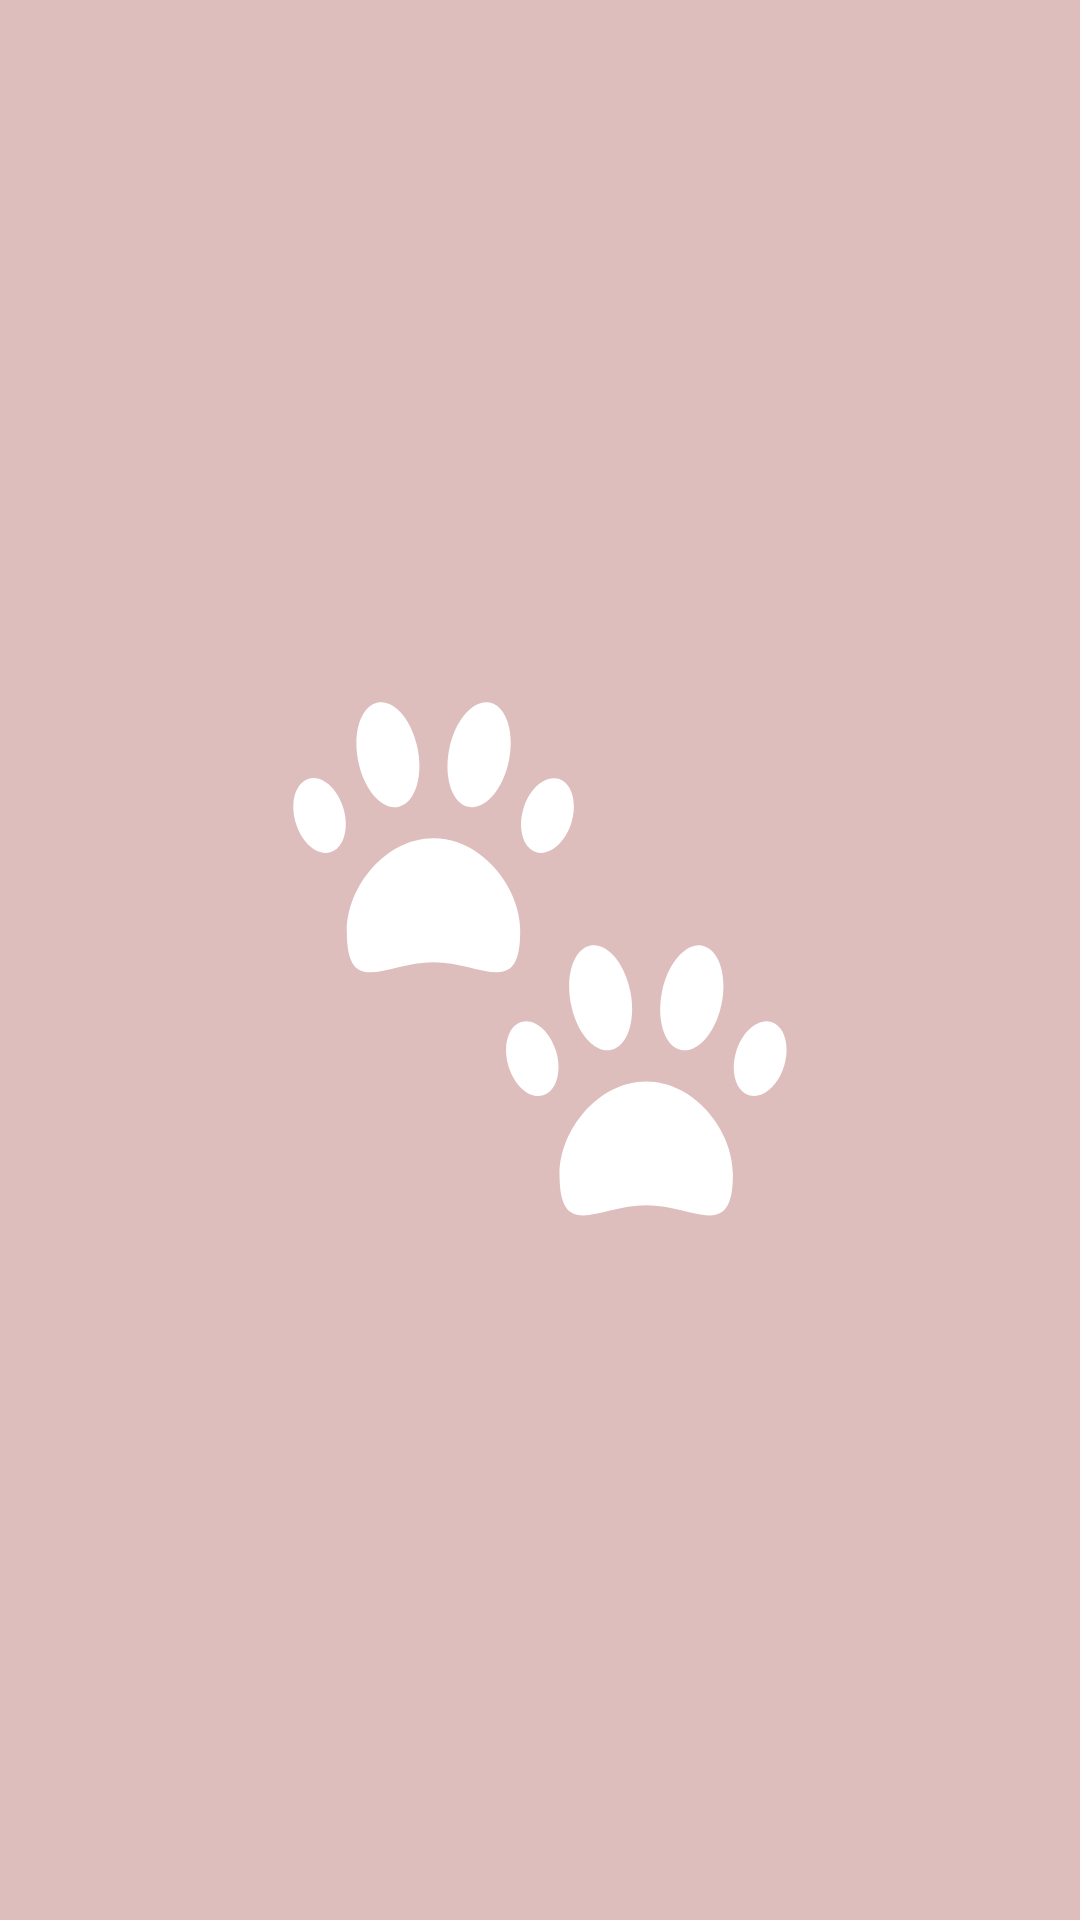 A white paw print on a pink background